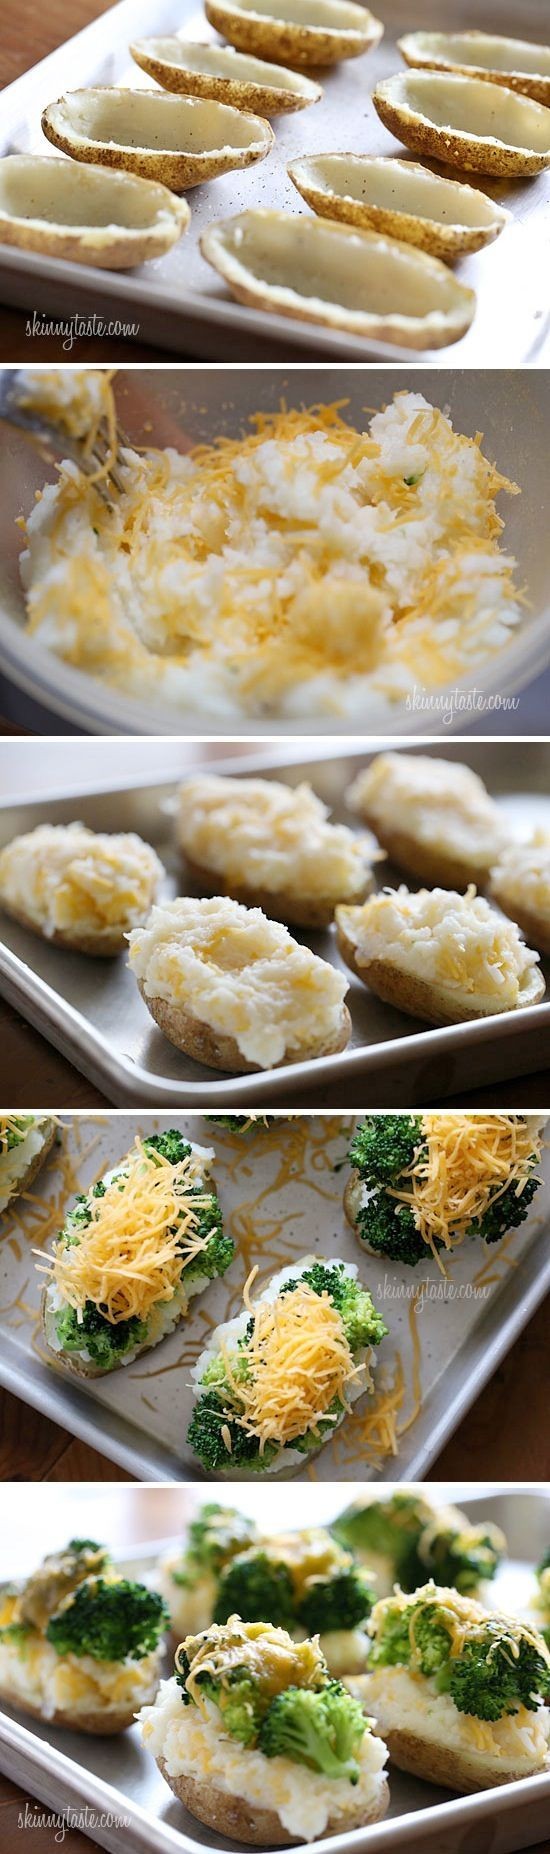 Broccoli and Cheese Twice Baked Potatoes.